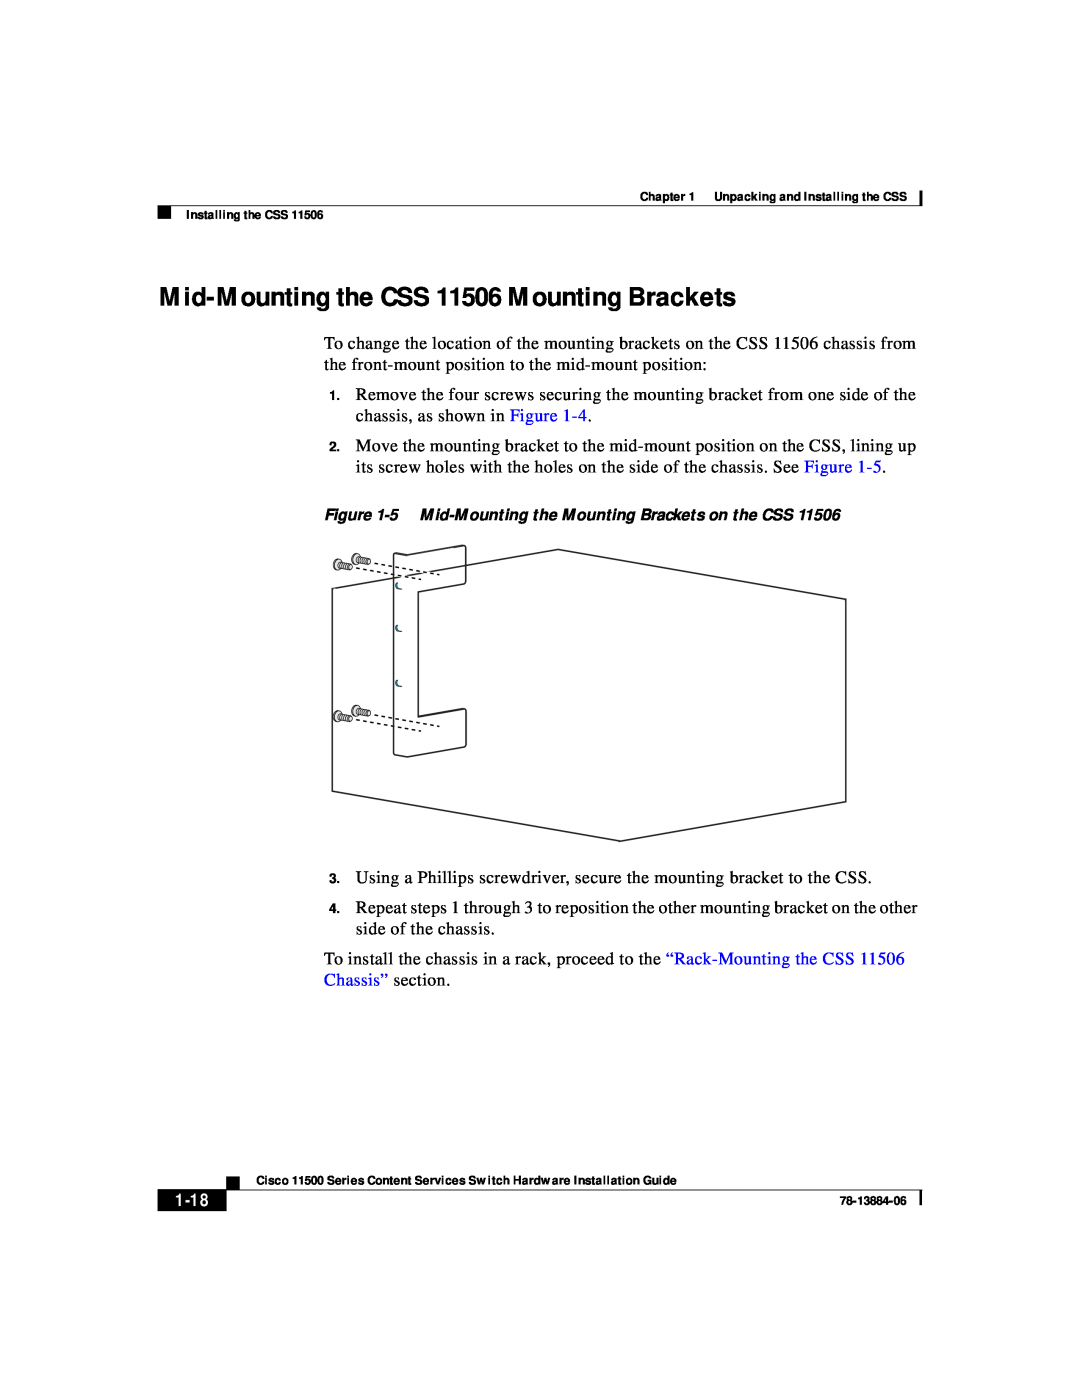 Cisco Systems 11500 Series manual Mid-Mounting the CSS 11506 Mounting Brackets, 1-18 